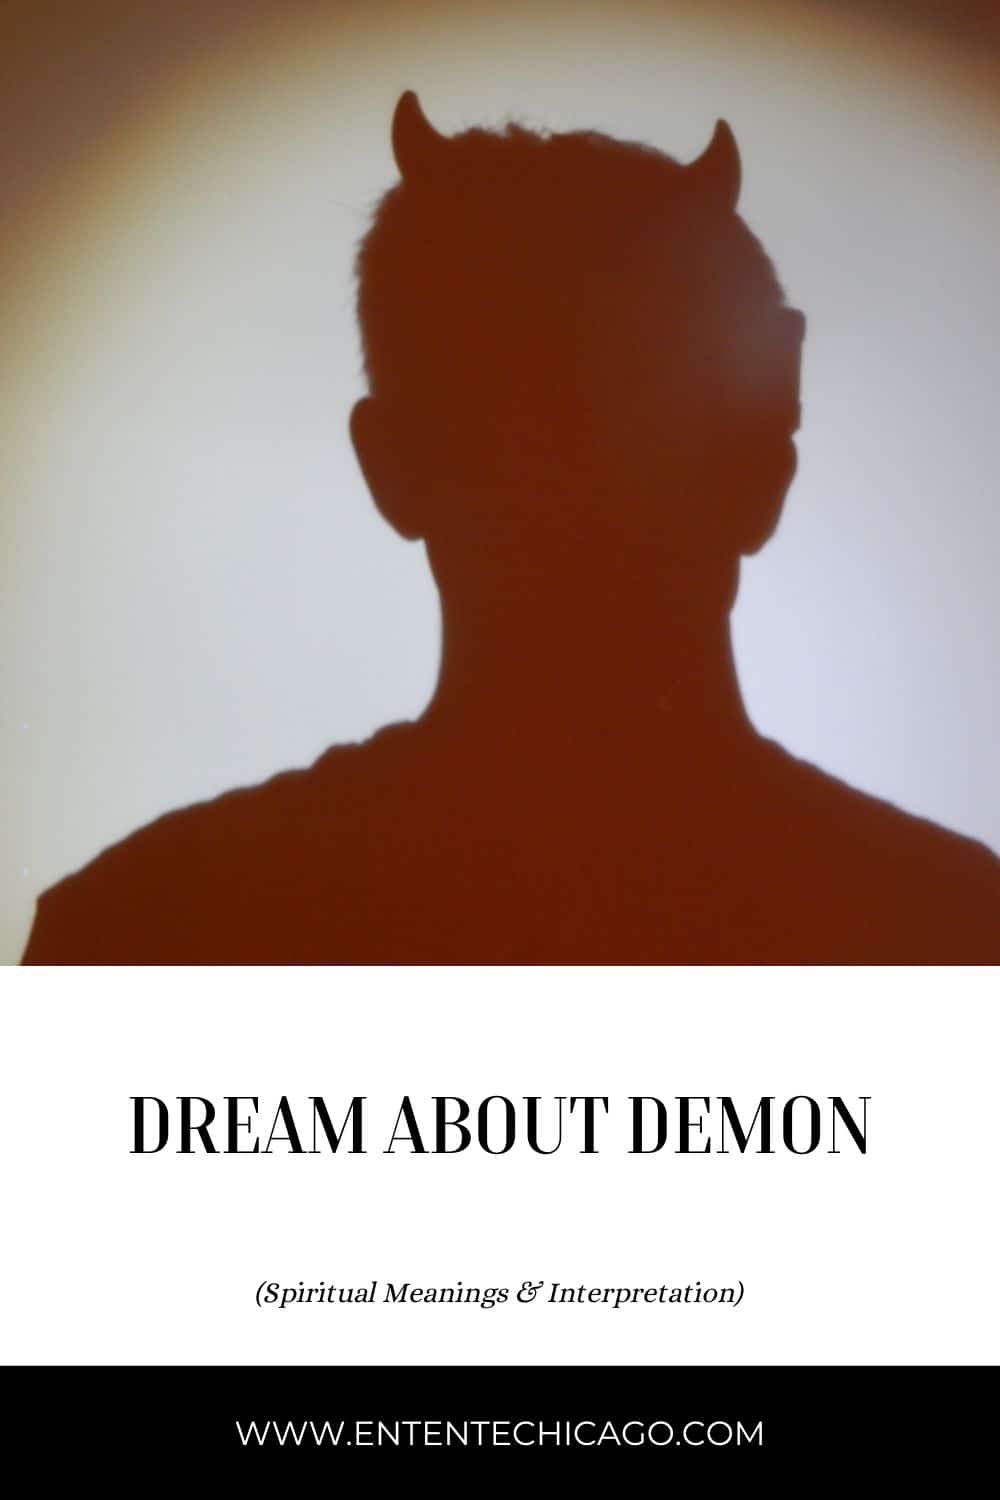 Dreams About Demons: What They Mean